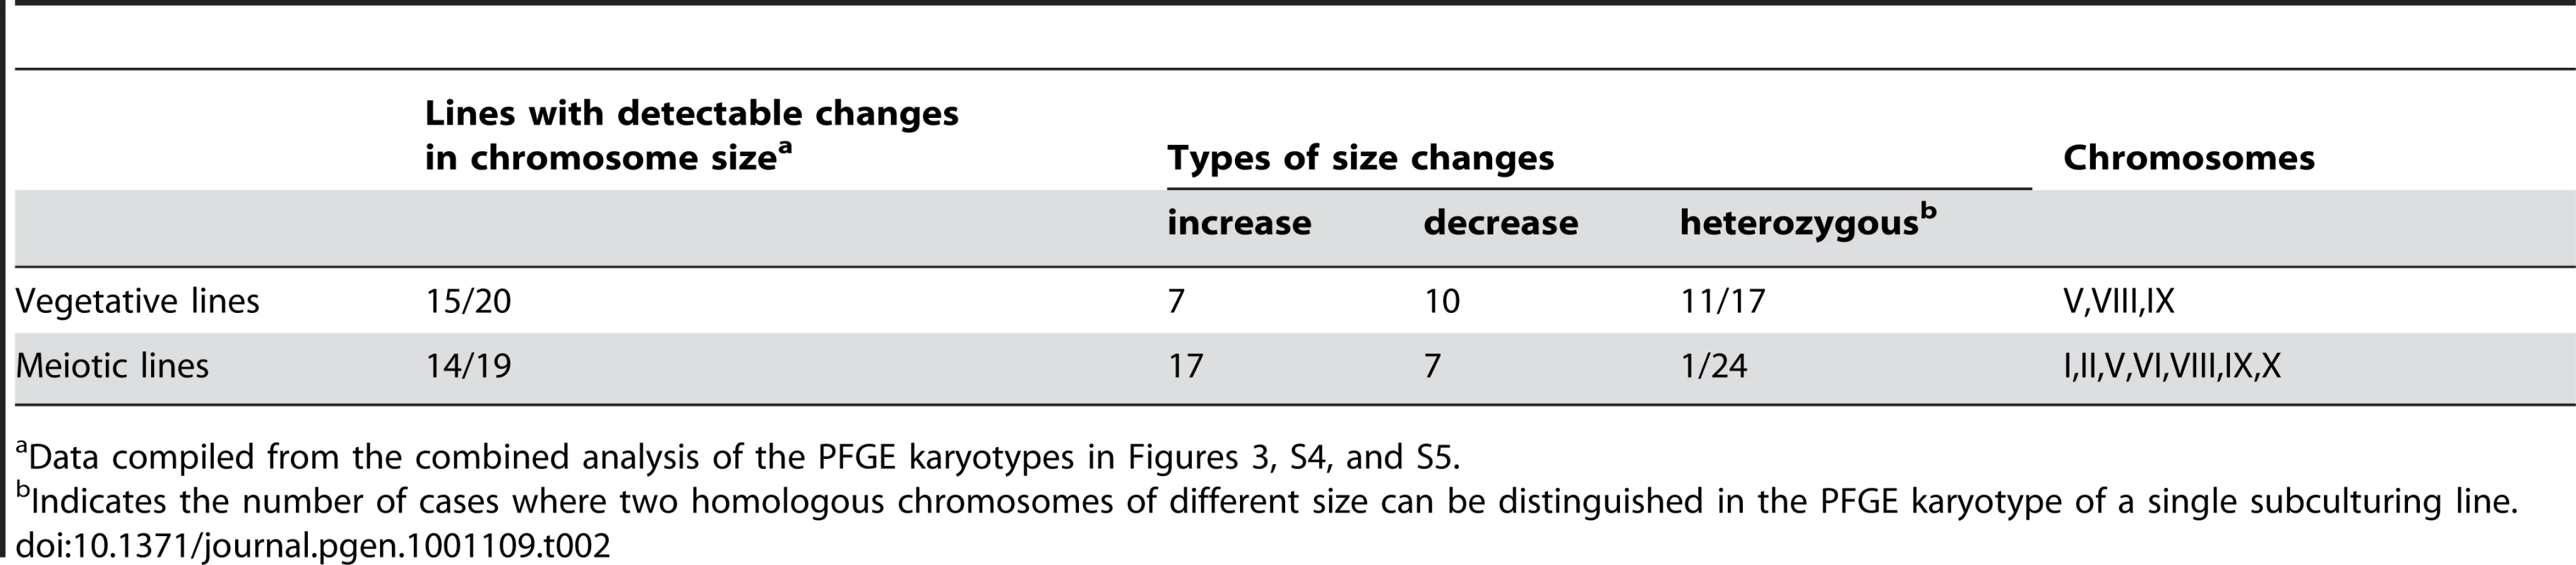 Summary of chromosome size changes detected by PFGE karyotyping.